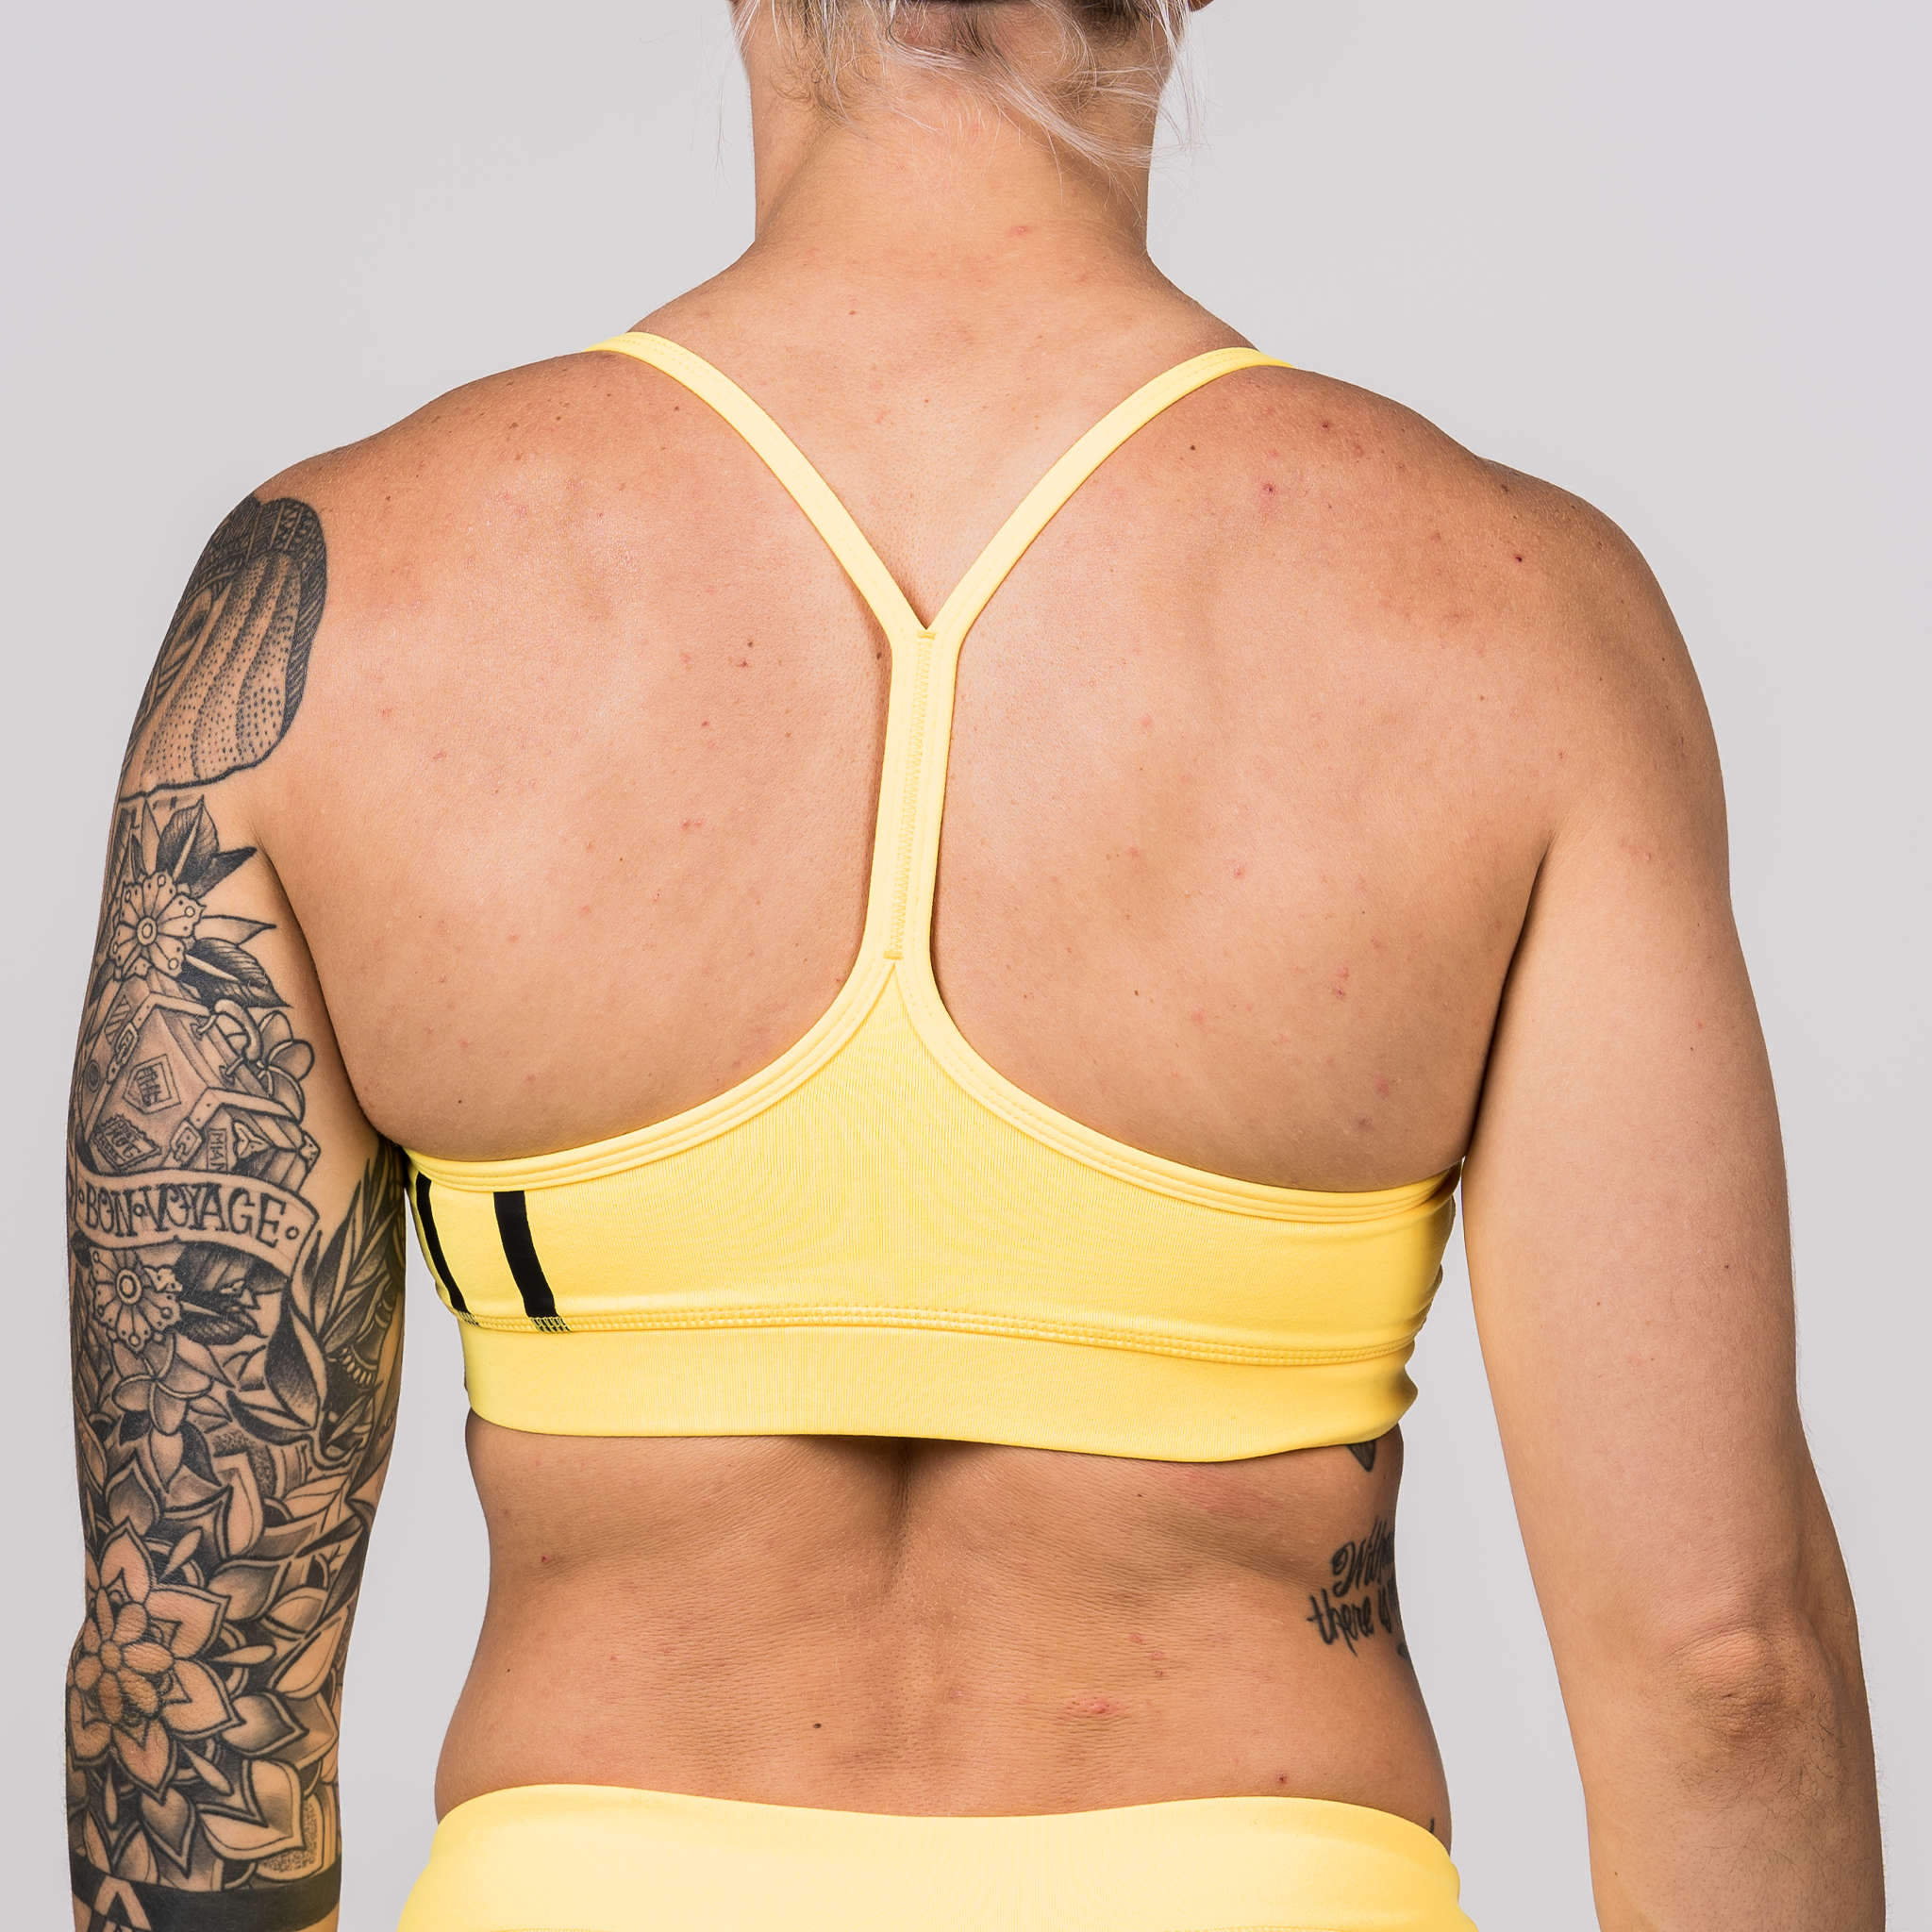 CV Color Guard Sport Bras (3-Pack) - Aimie's Creations